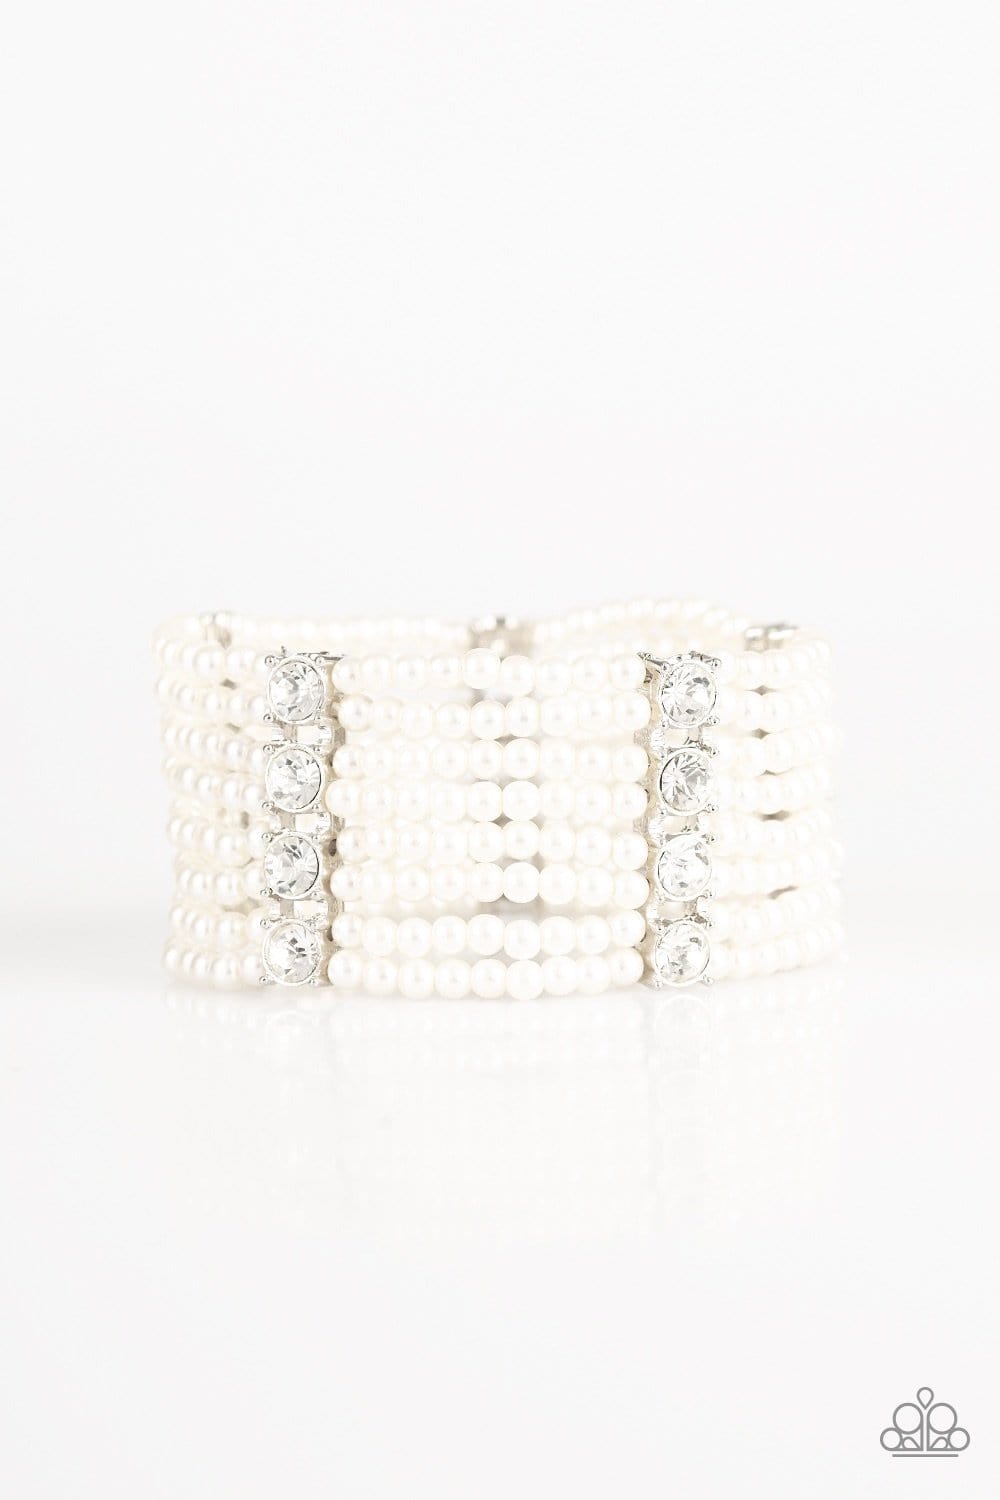 Get In Line - White: Paparazzi Accessories - Jewels N’ Thingz Boutique